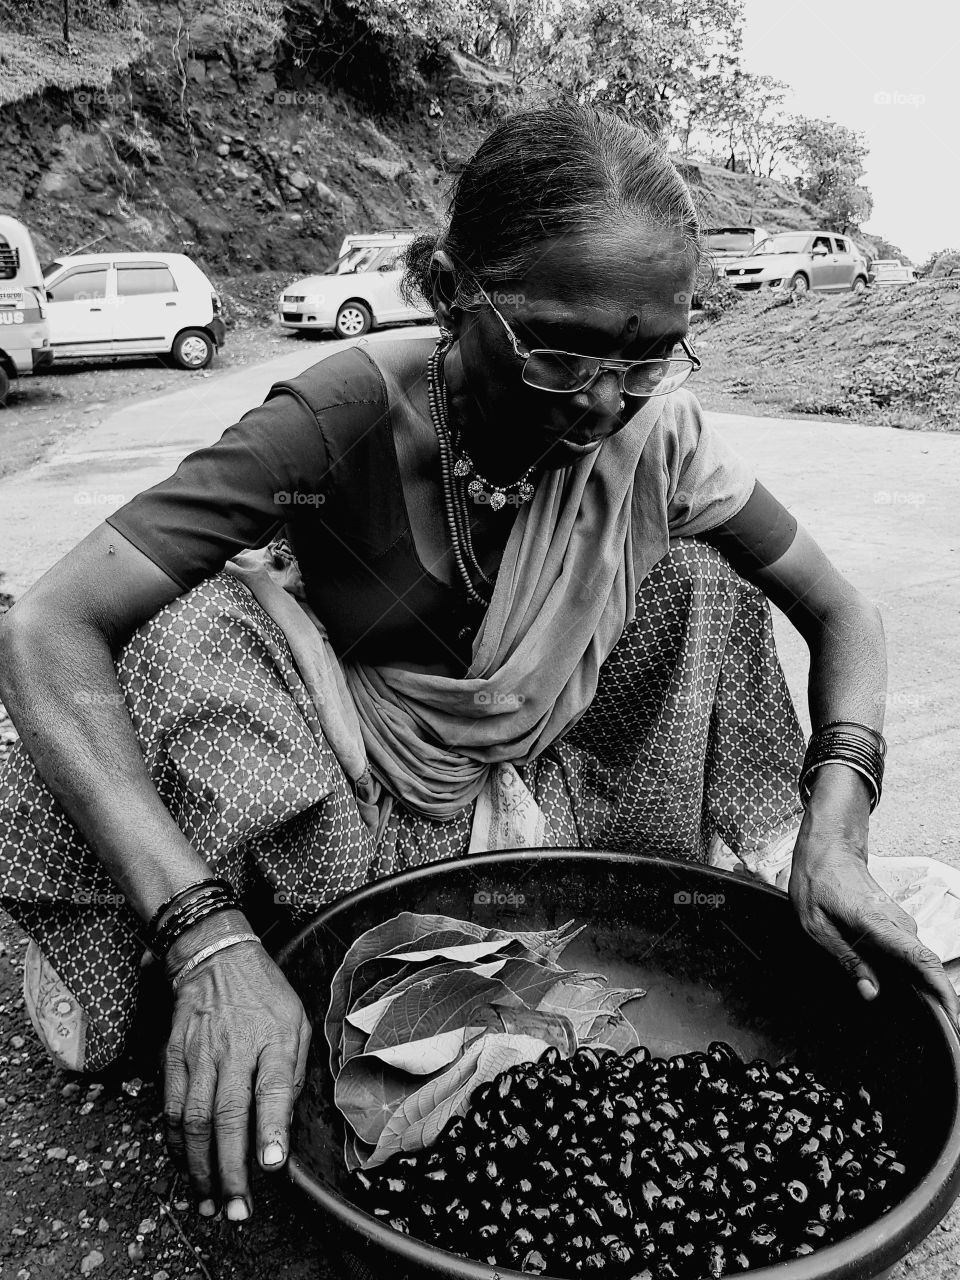 A lady with her fruit basket, roadside seller, black and white click, honestly earning and living her life. Proud moments, no regrets, self employed,.. Lonely and lonely....